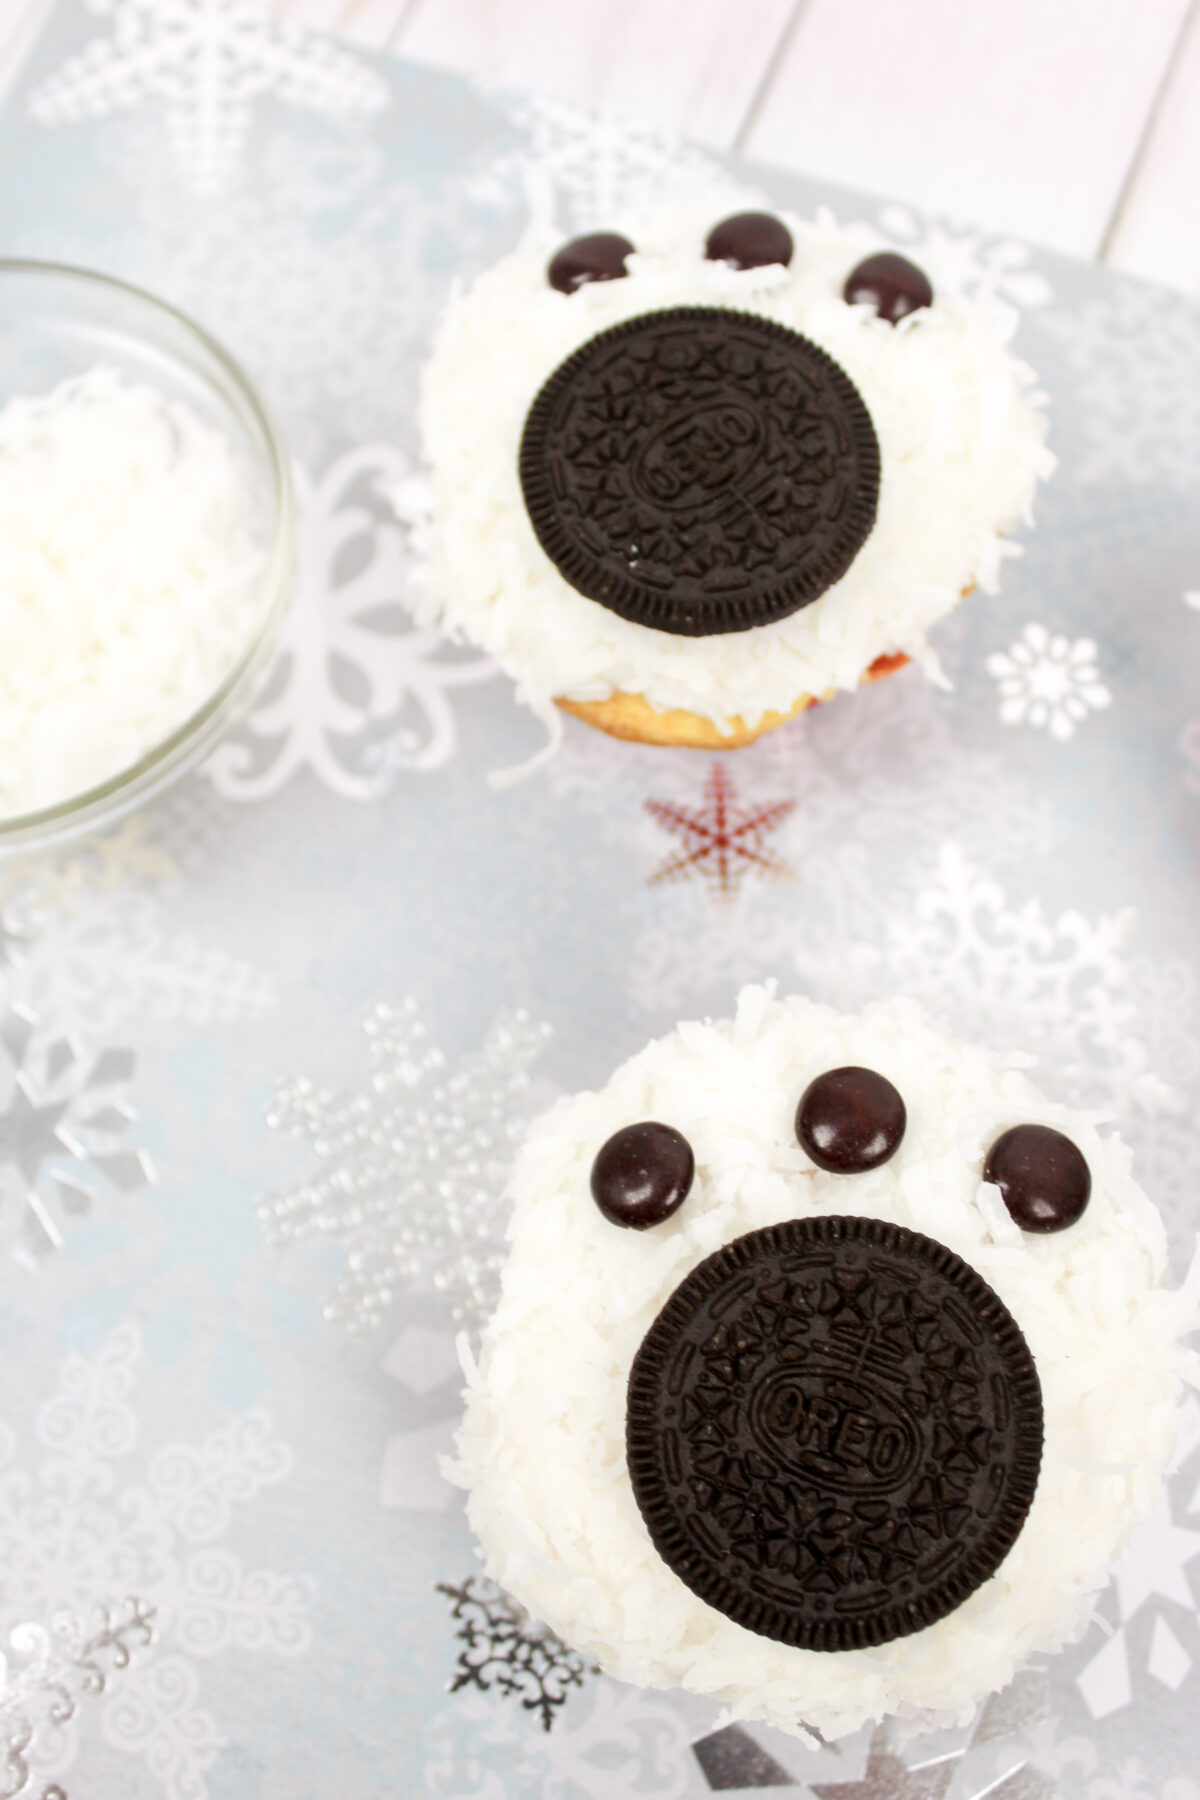 These adorable Polar Bear Paw Cupcakes are perfect for any winter or holiday party. They're easy to make and can be decorated in minutes.